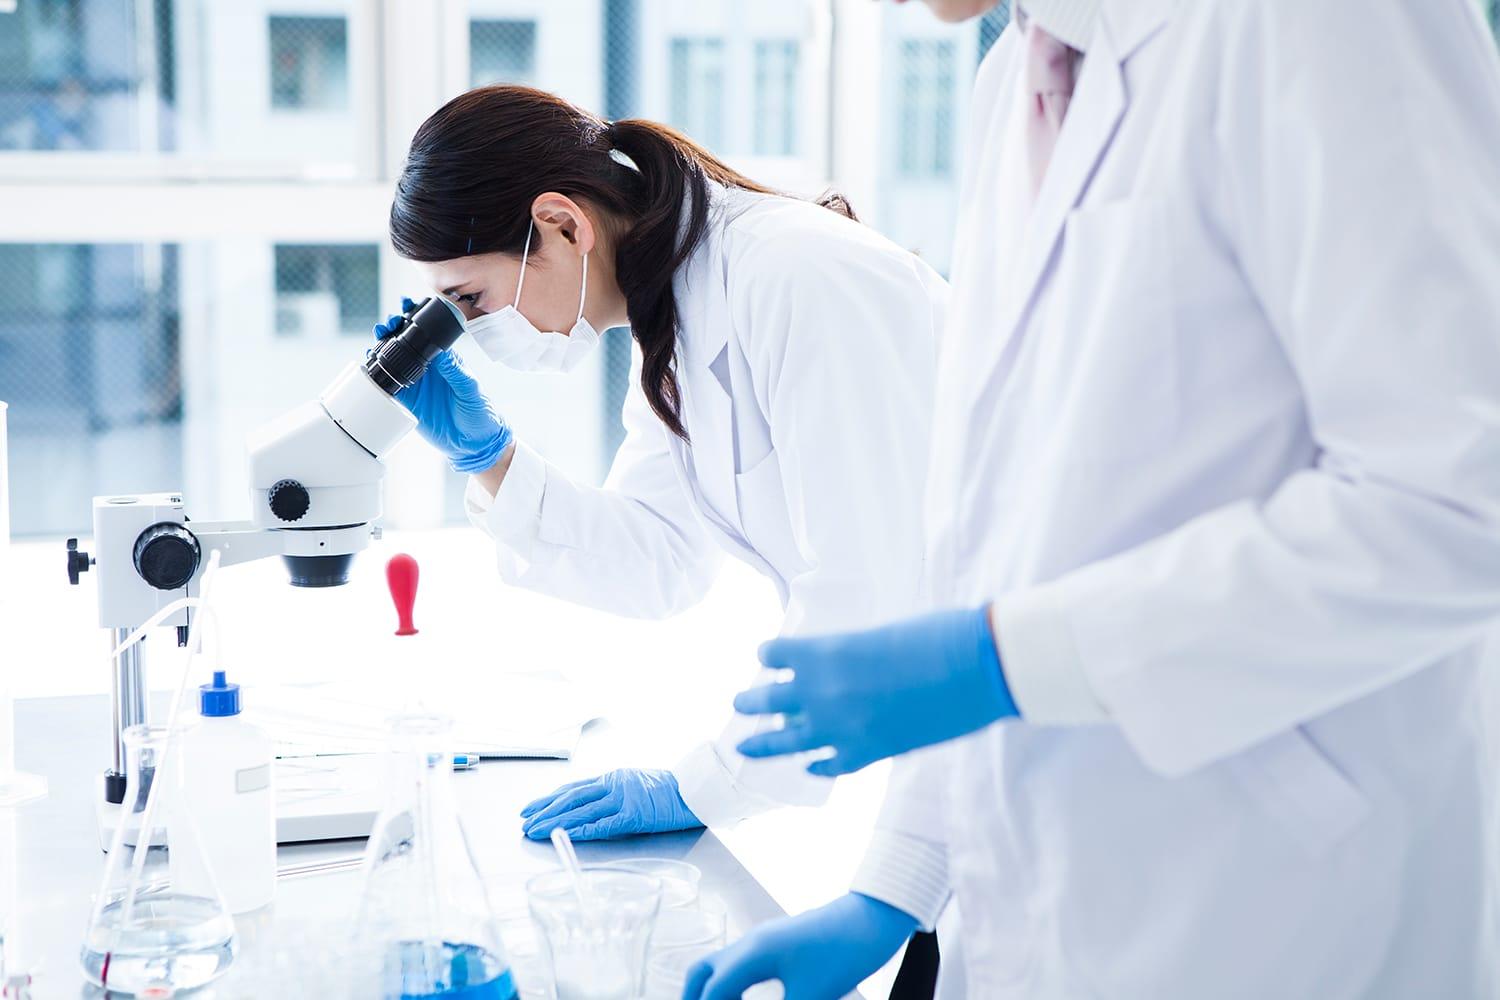 Female clinical research scientist in white lab coat peers into microscope in a lab.